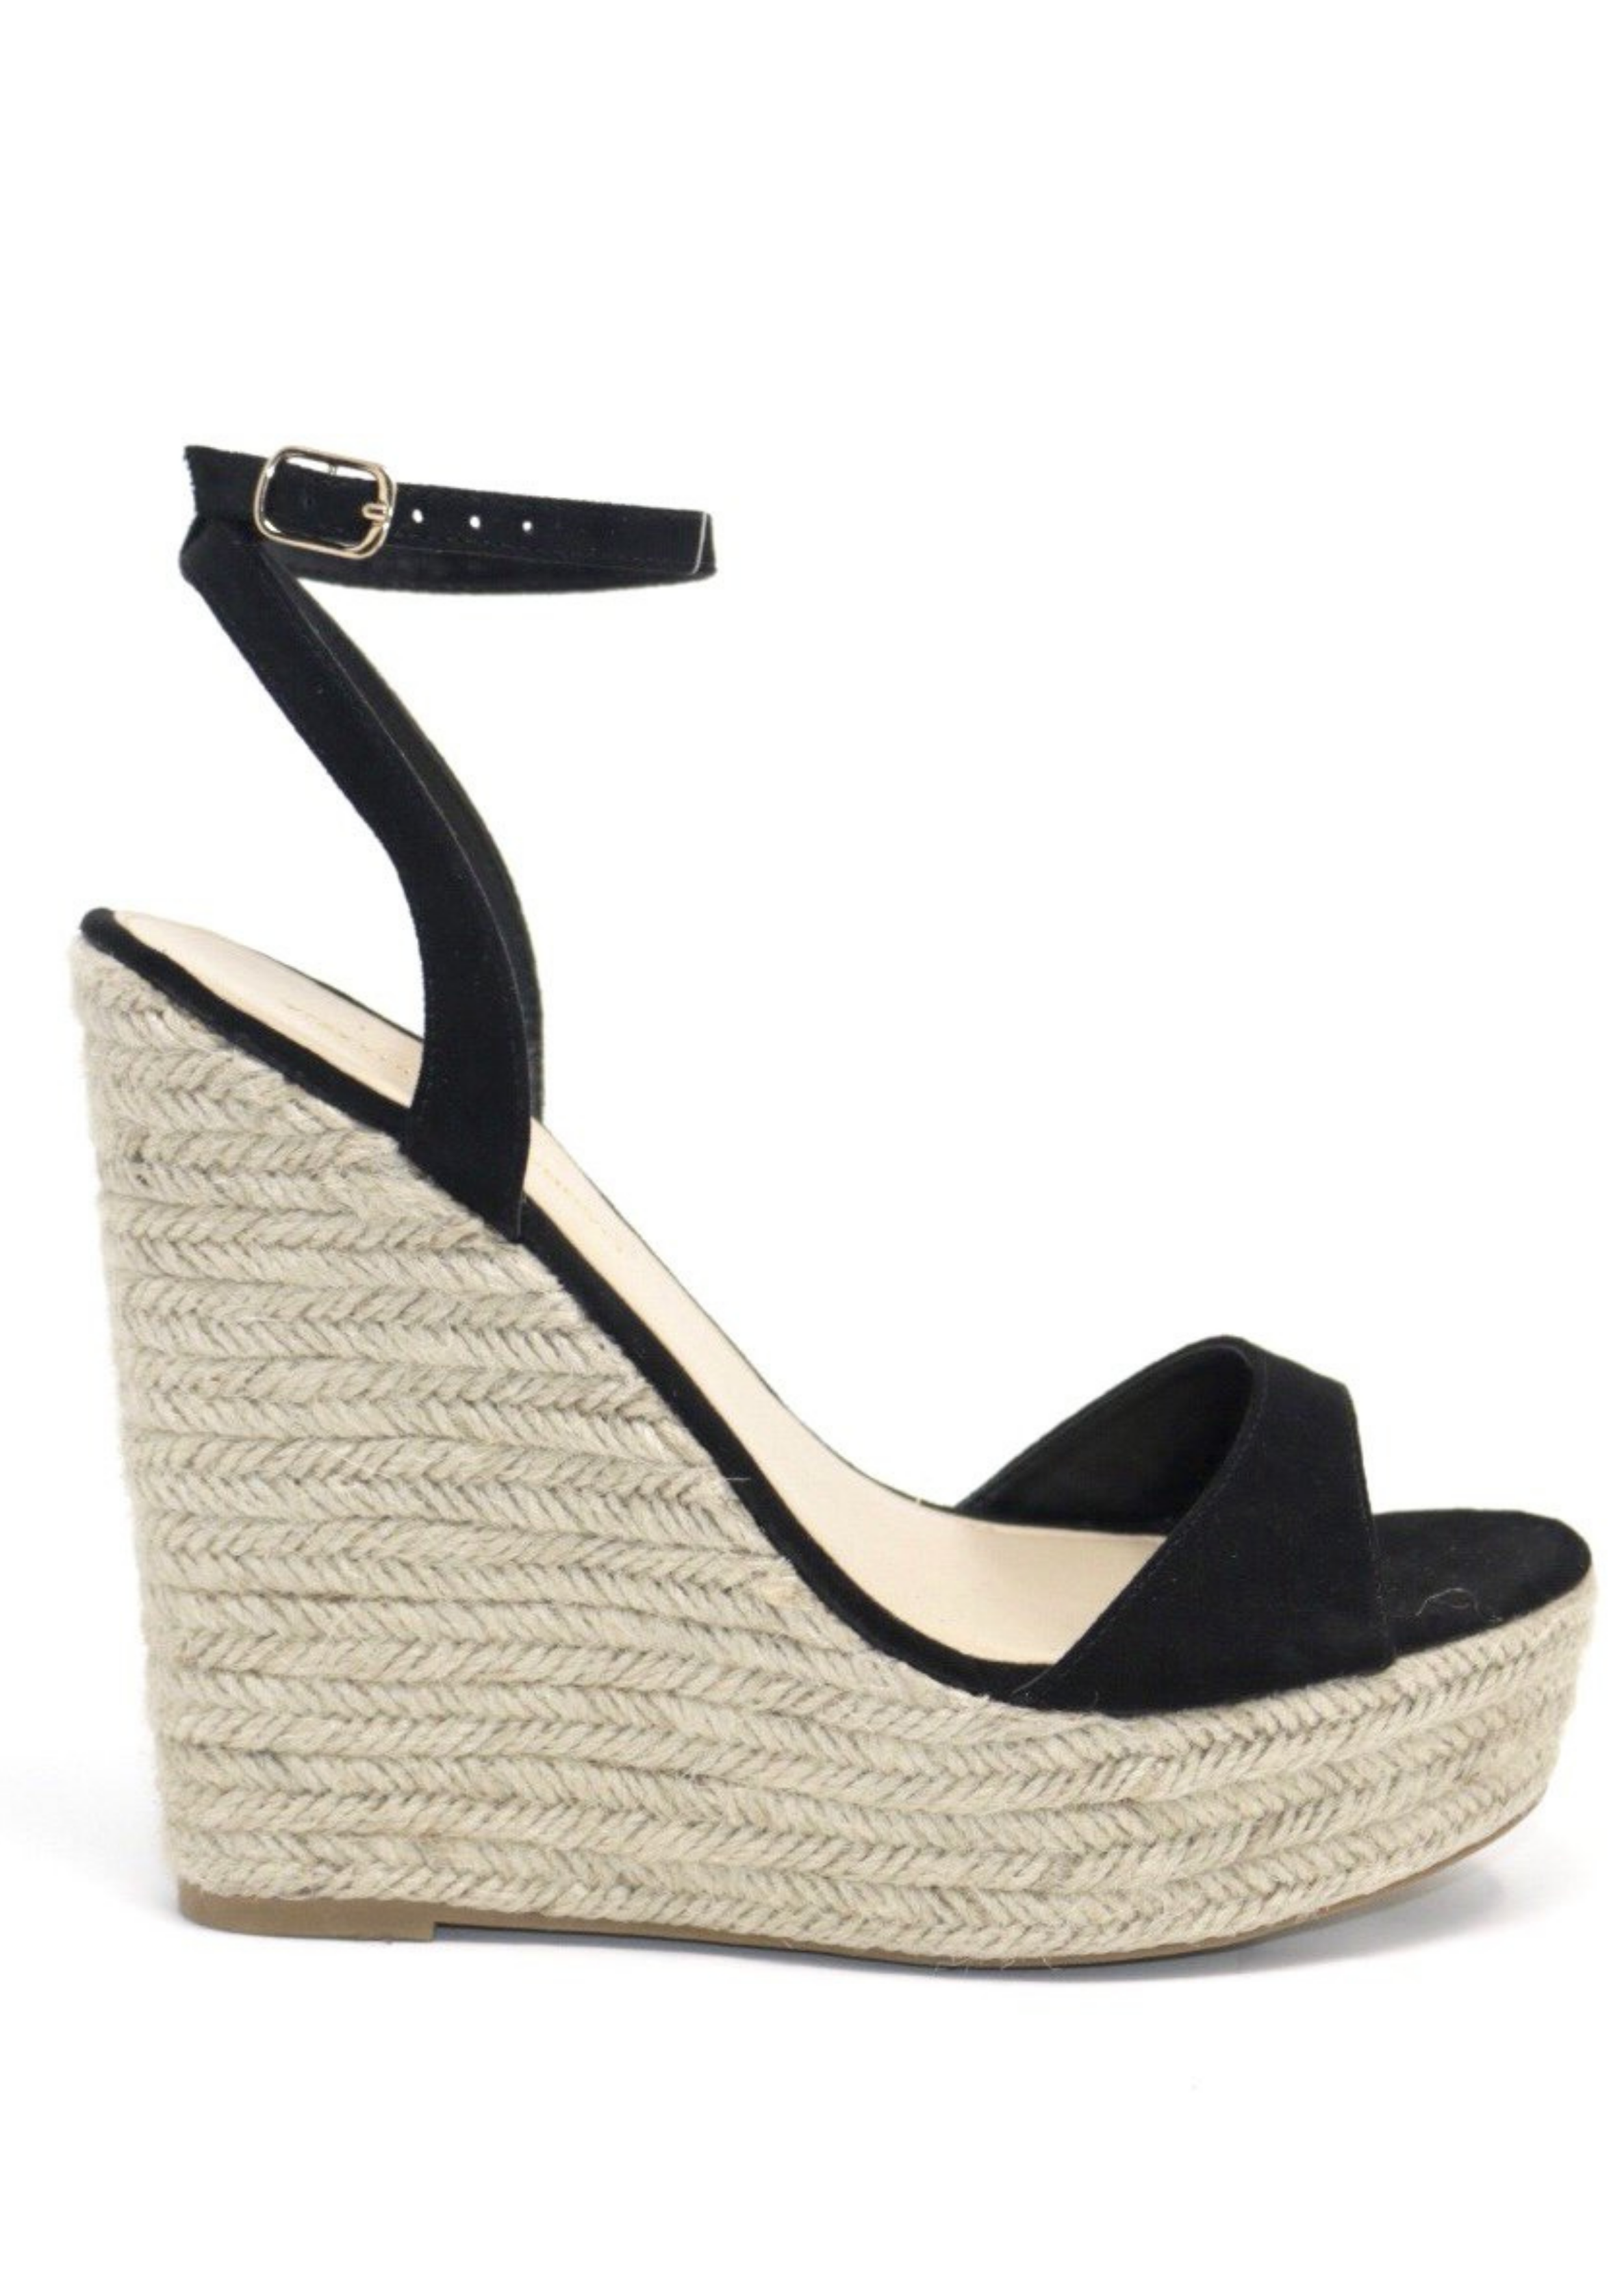 Alyssa B Espadrille Wedge in Black. Black suede ALYSSA wedge with espadrille wedge that crisscross strap that crosses in the back as the buckle buckles in the side that is silver. Thick to thin back to thick strap in the front.